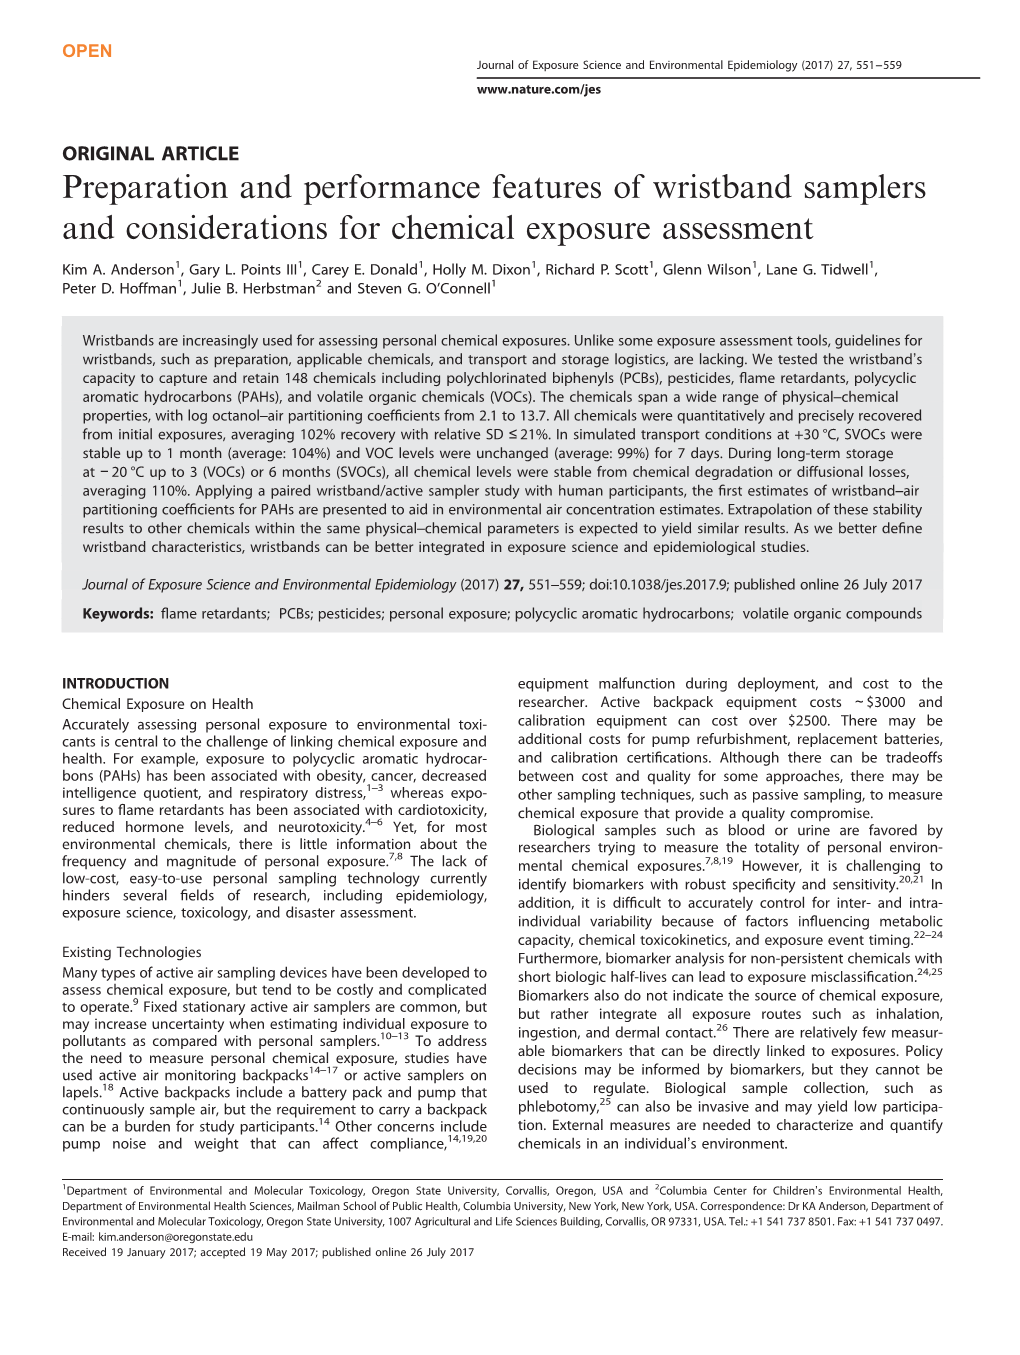 Preparation and Performance Features of Wristband Samplers and Considerations for Chemical Exposure Assessment